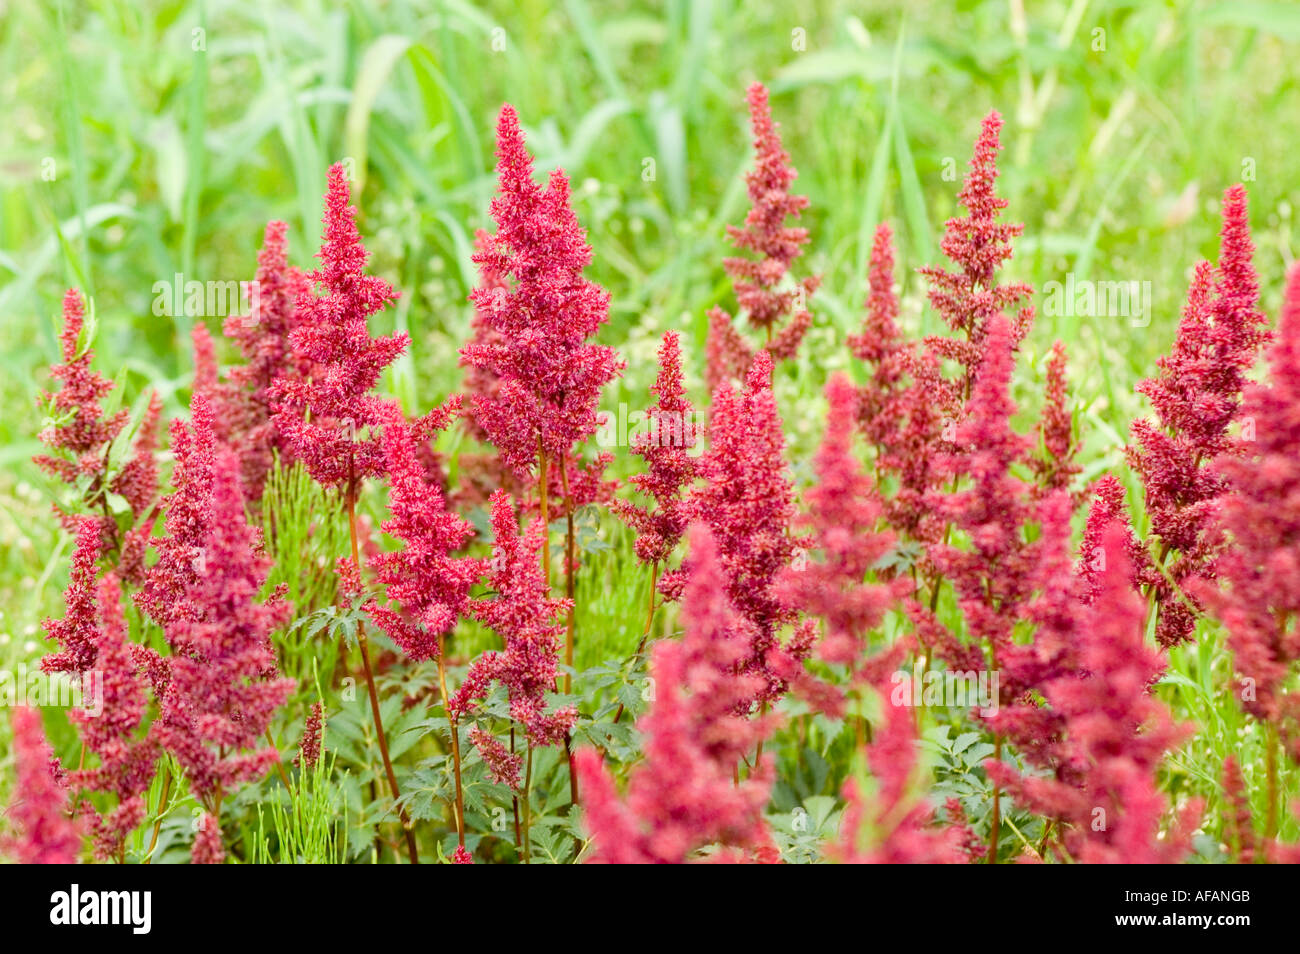 Red flowers of Astilbe or False spirea Saxifragaceae Astilbe x Arendsii Fanal China Japan Korea Stock Photo